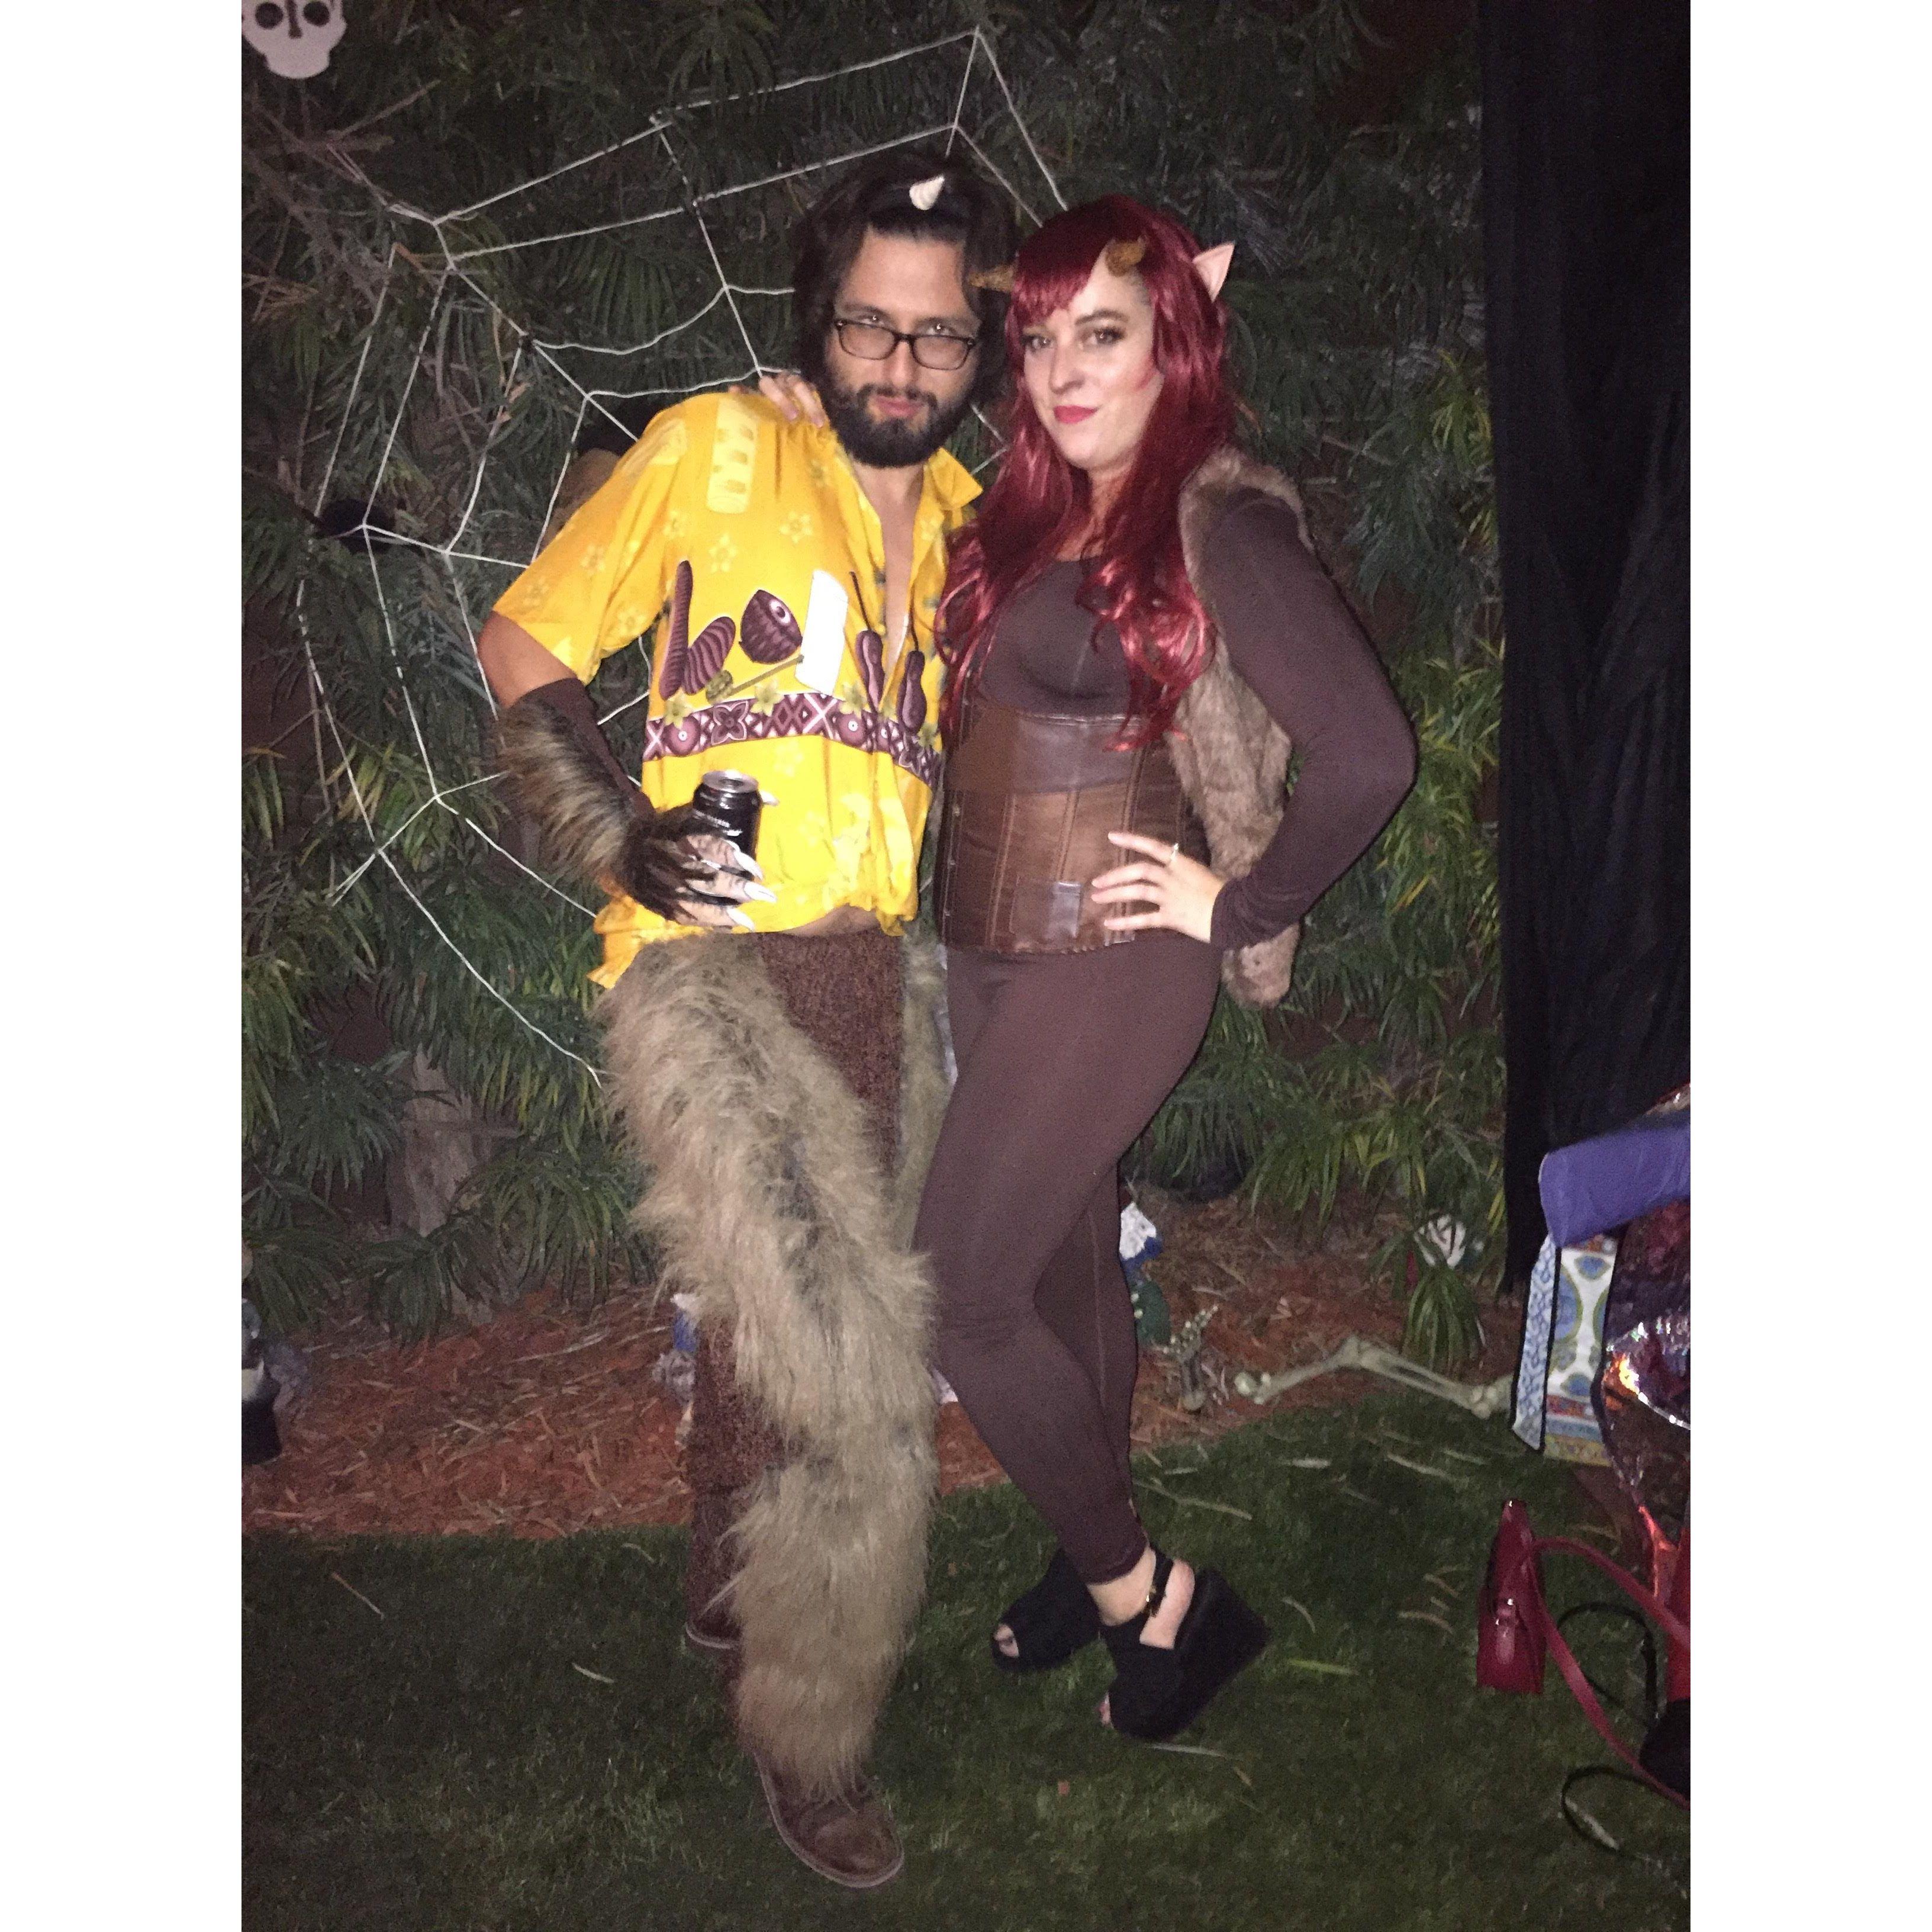 Hormone Monsters from Big Mouth for Halloween 2017